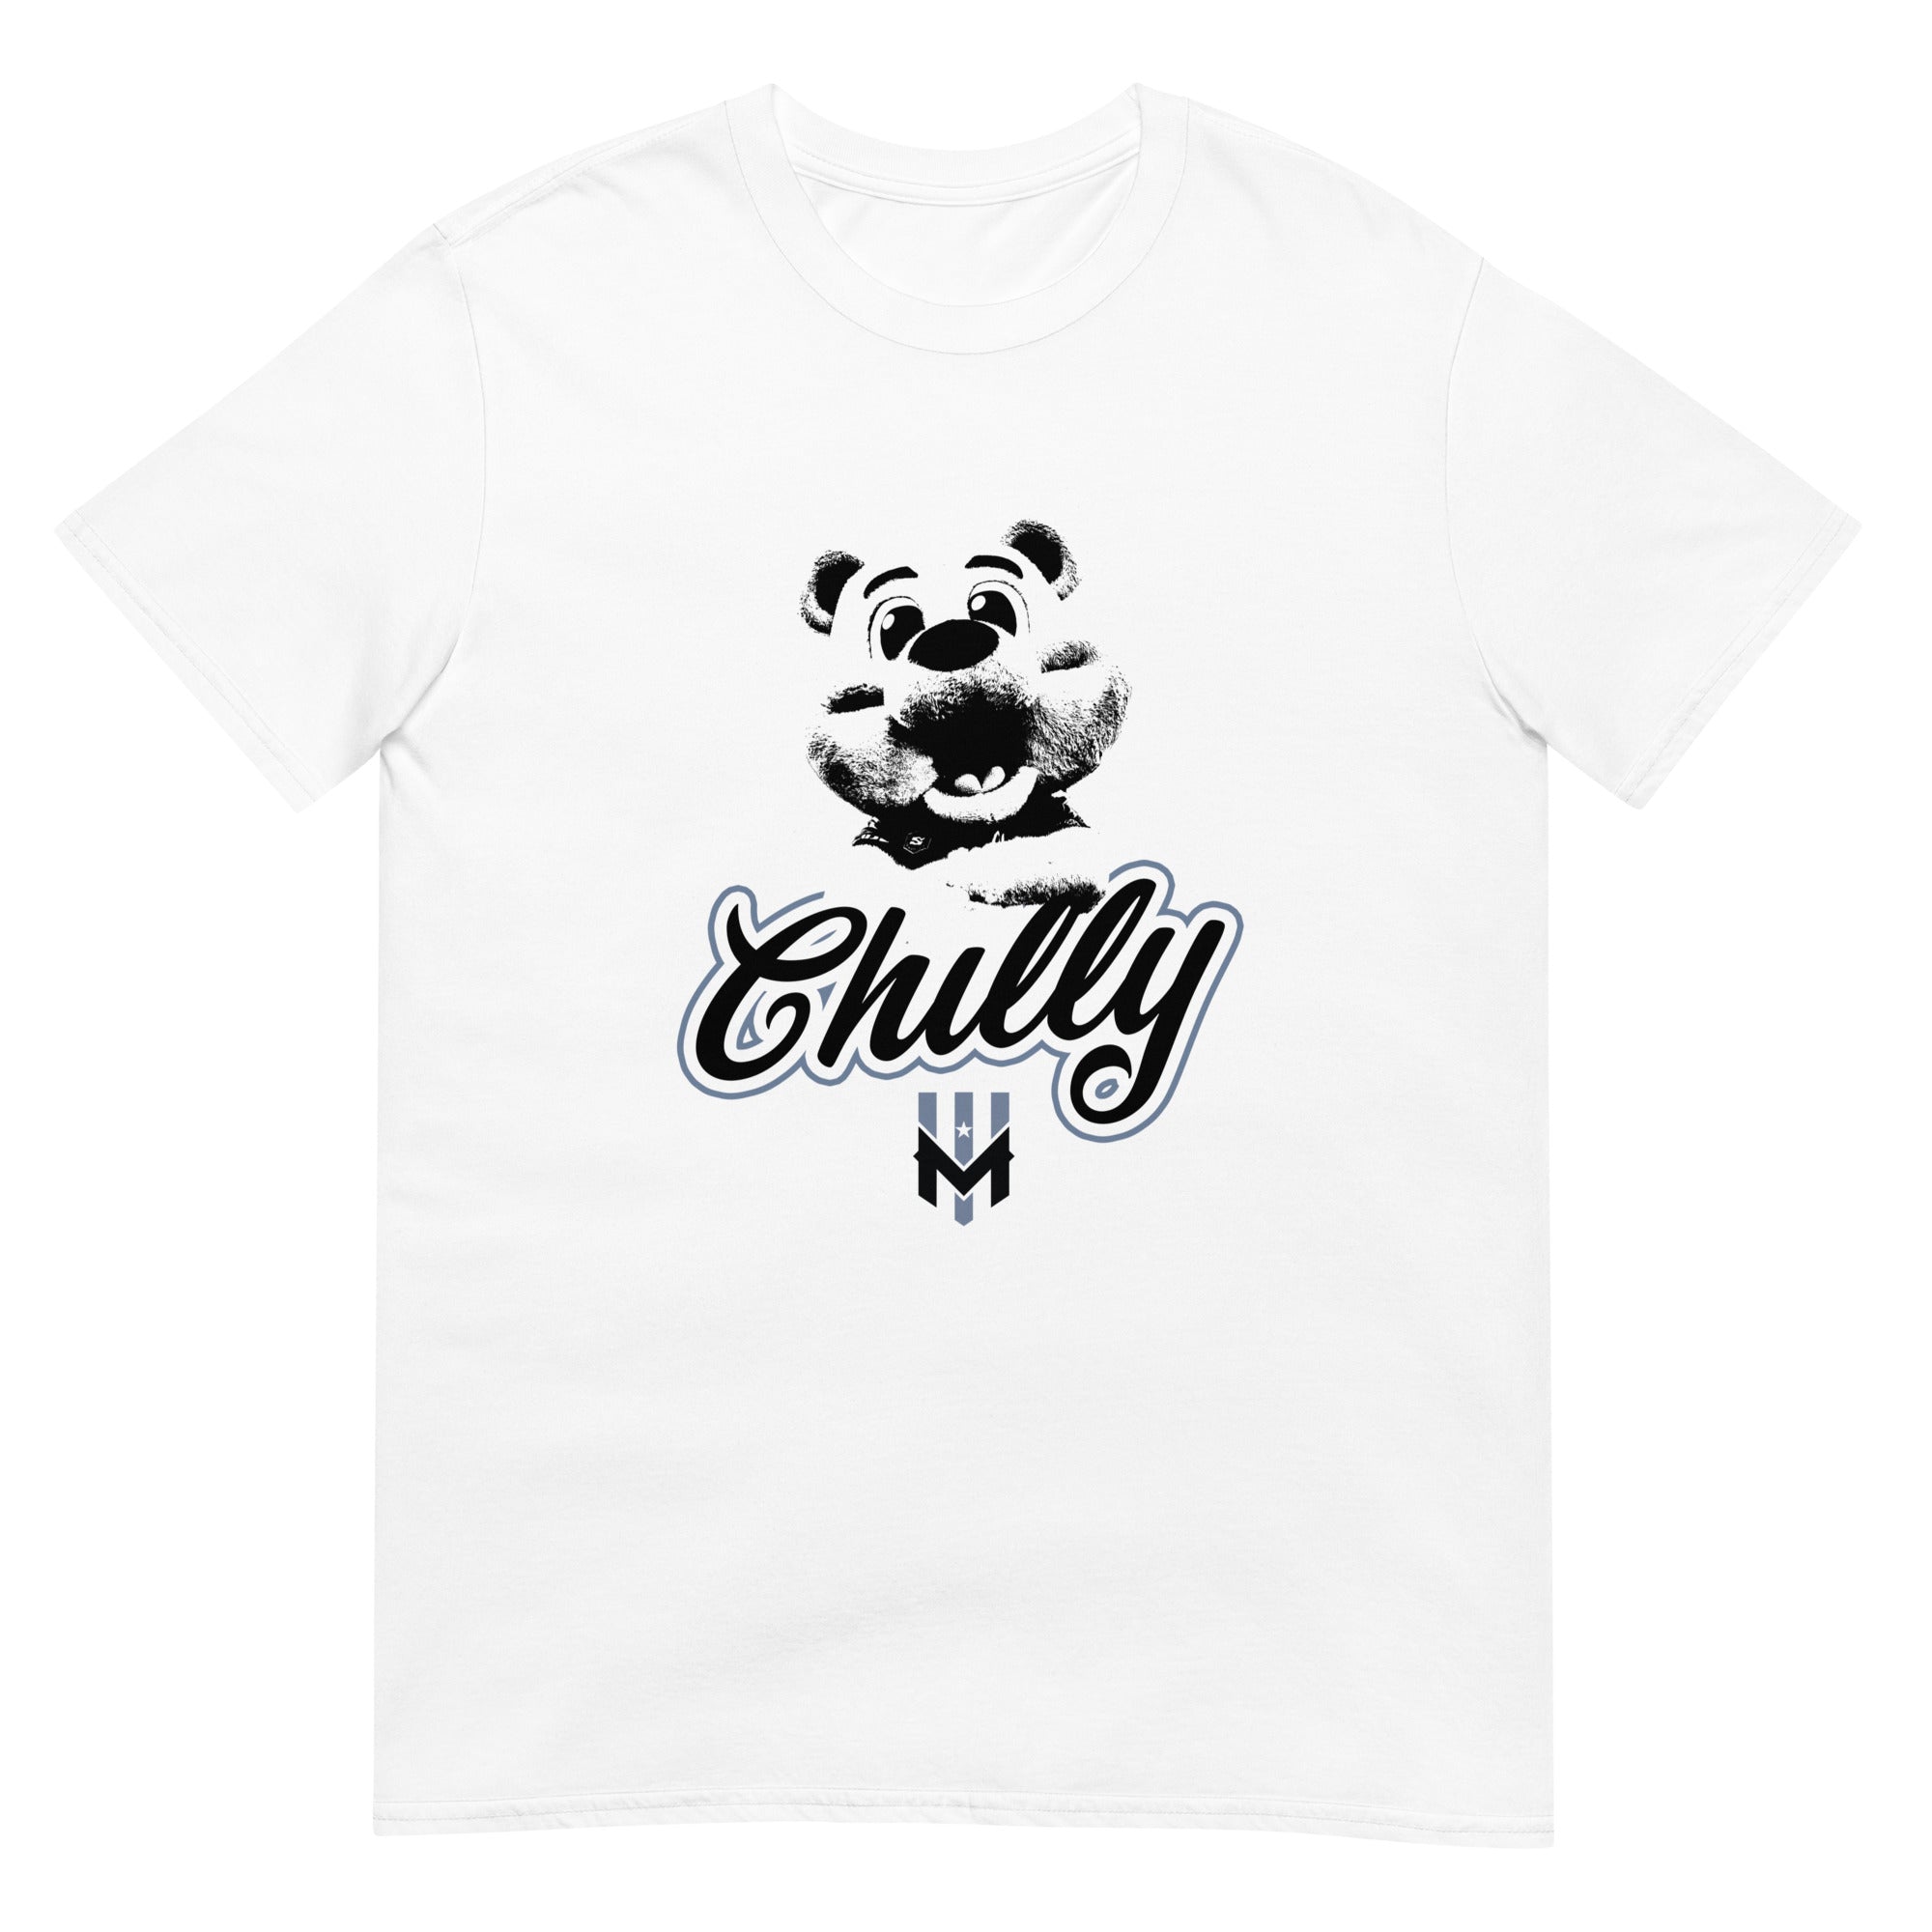 Wind Chill White "Chilly the Mascot" T-Shirt